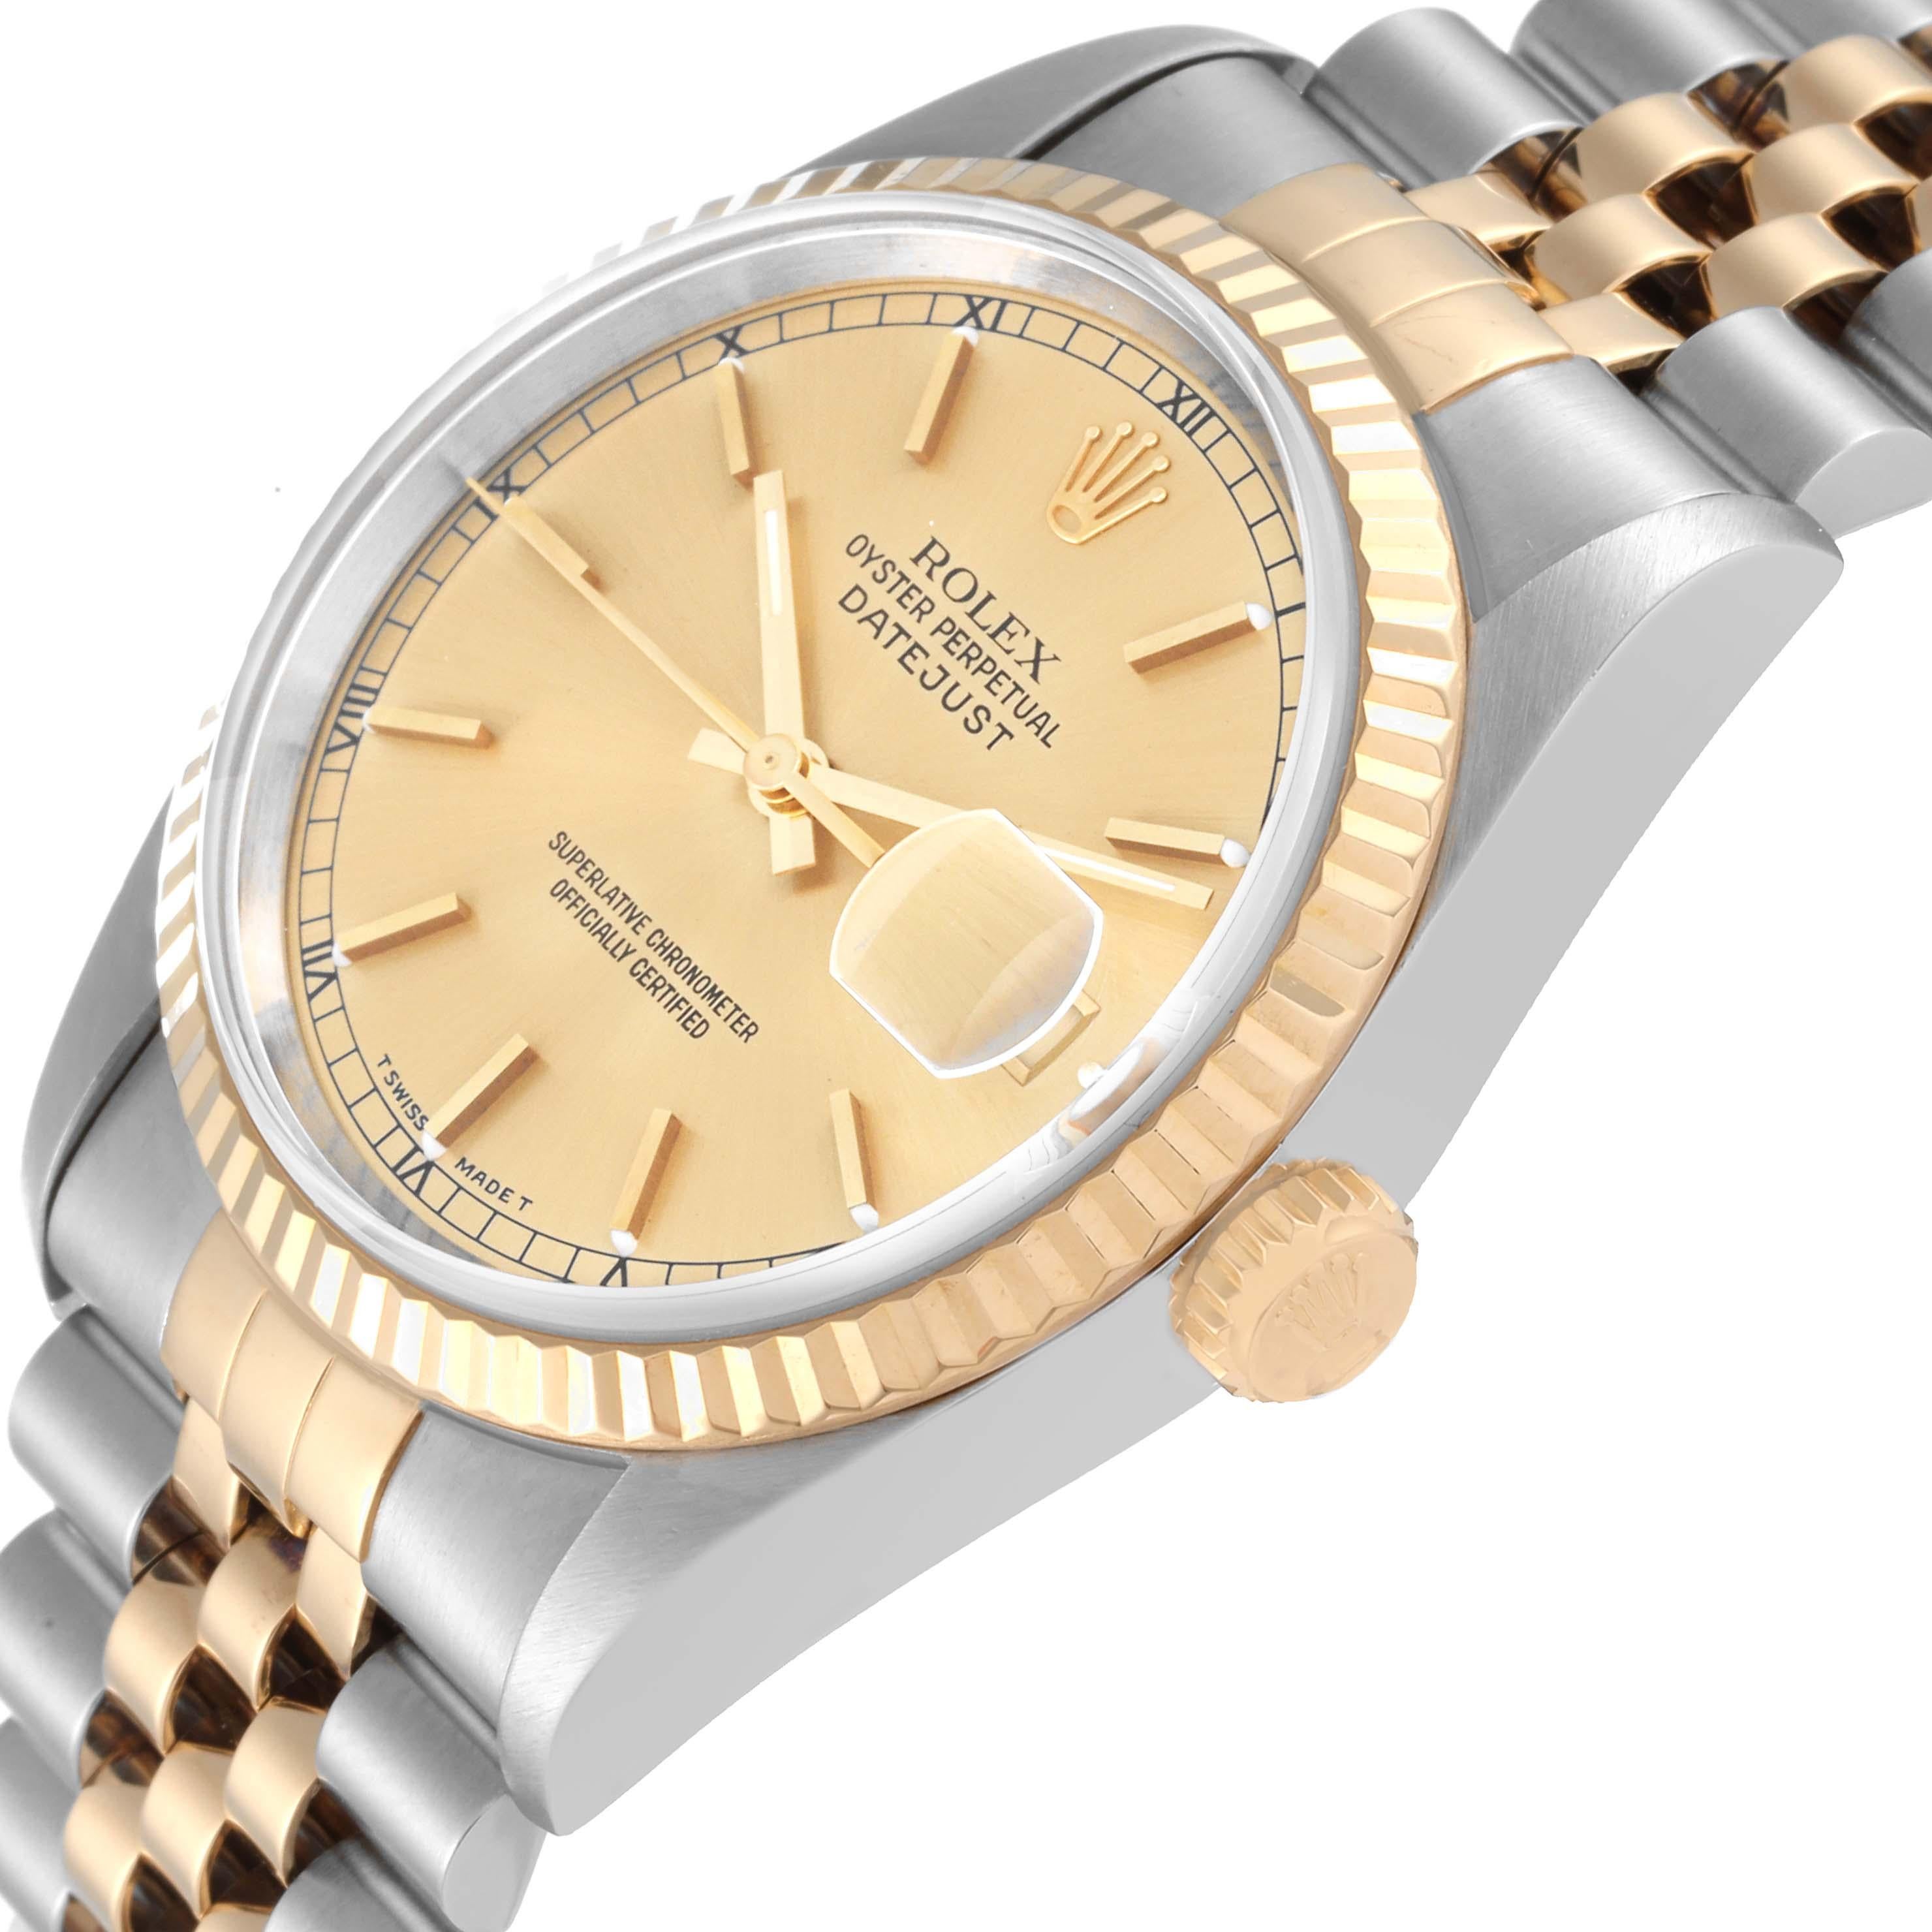 Men's Rolex Datejust 36 Steel Yellow Gold Champagne Dial Mens Watch 16233 Box Papers For Sale